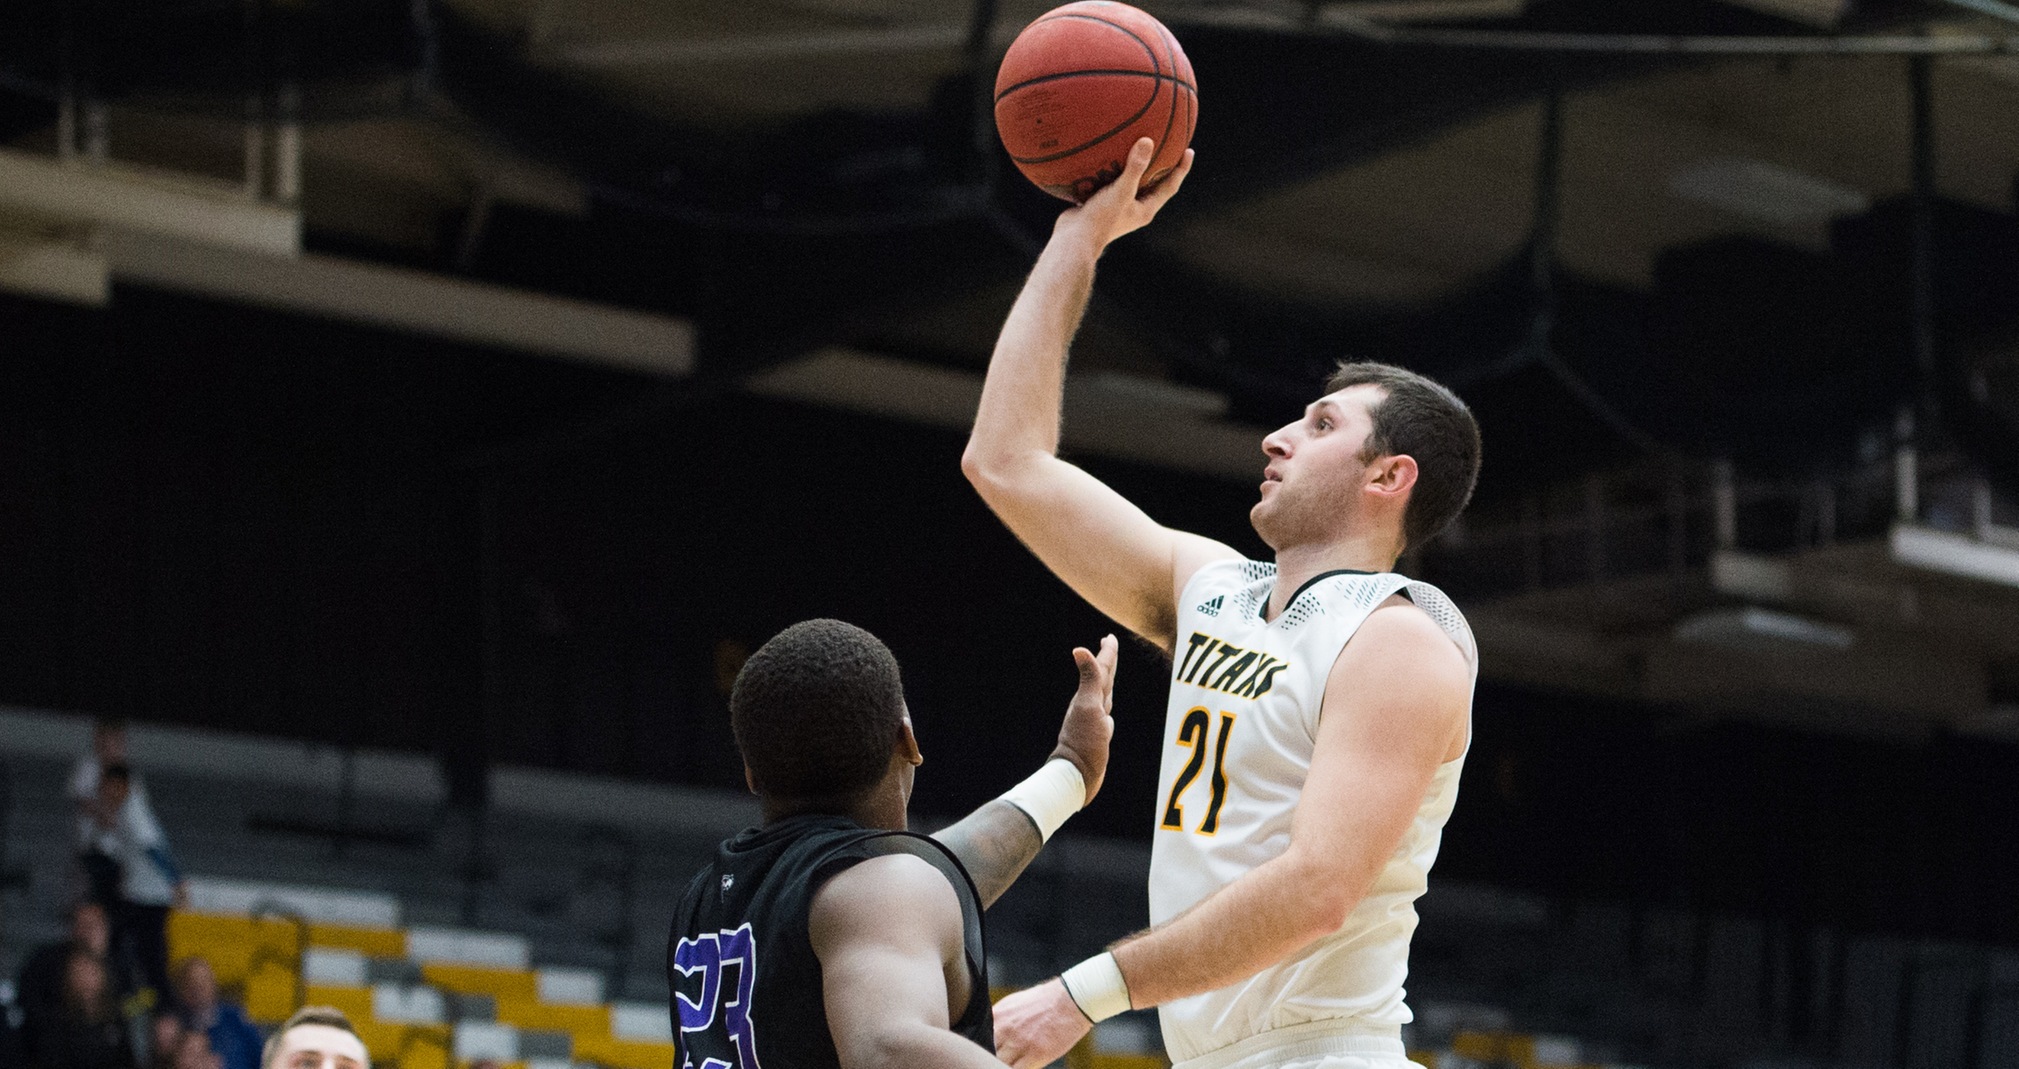 AJ Mueller scored 10 points and grabbed a season-high six rebounds against the Warhawks.